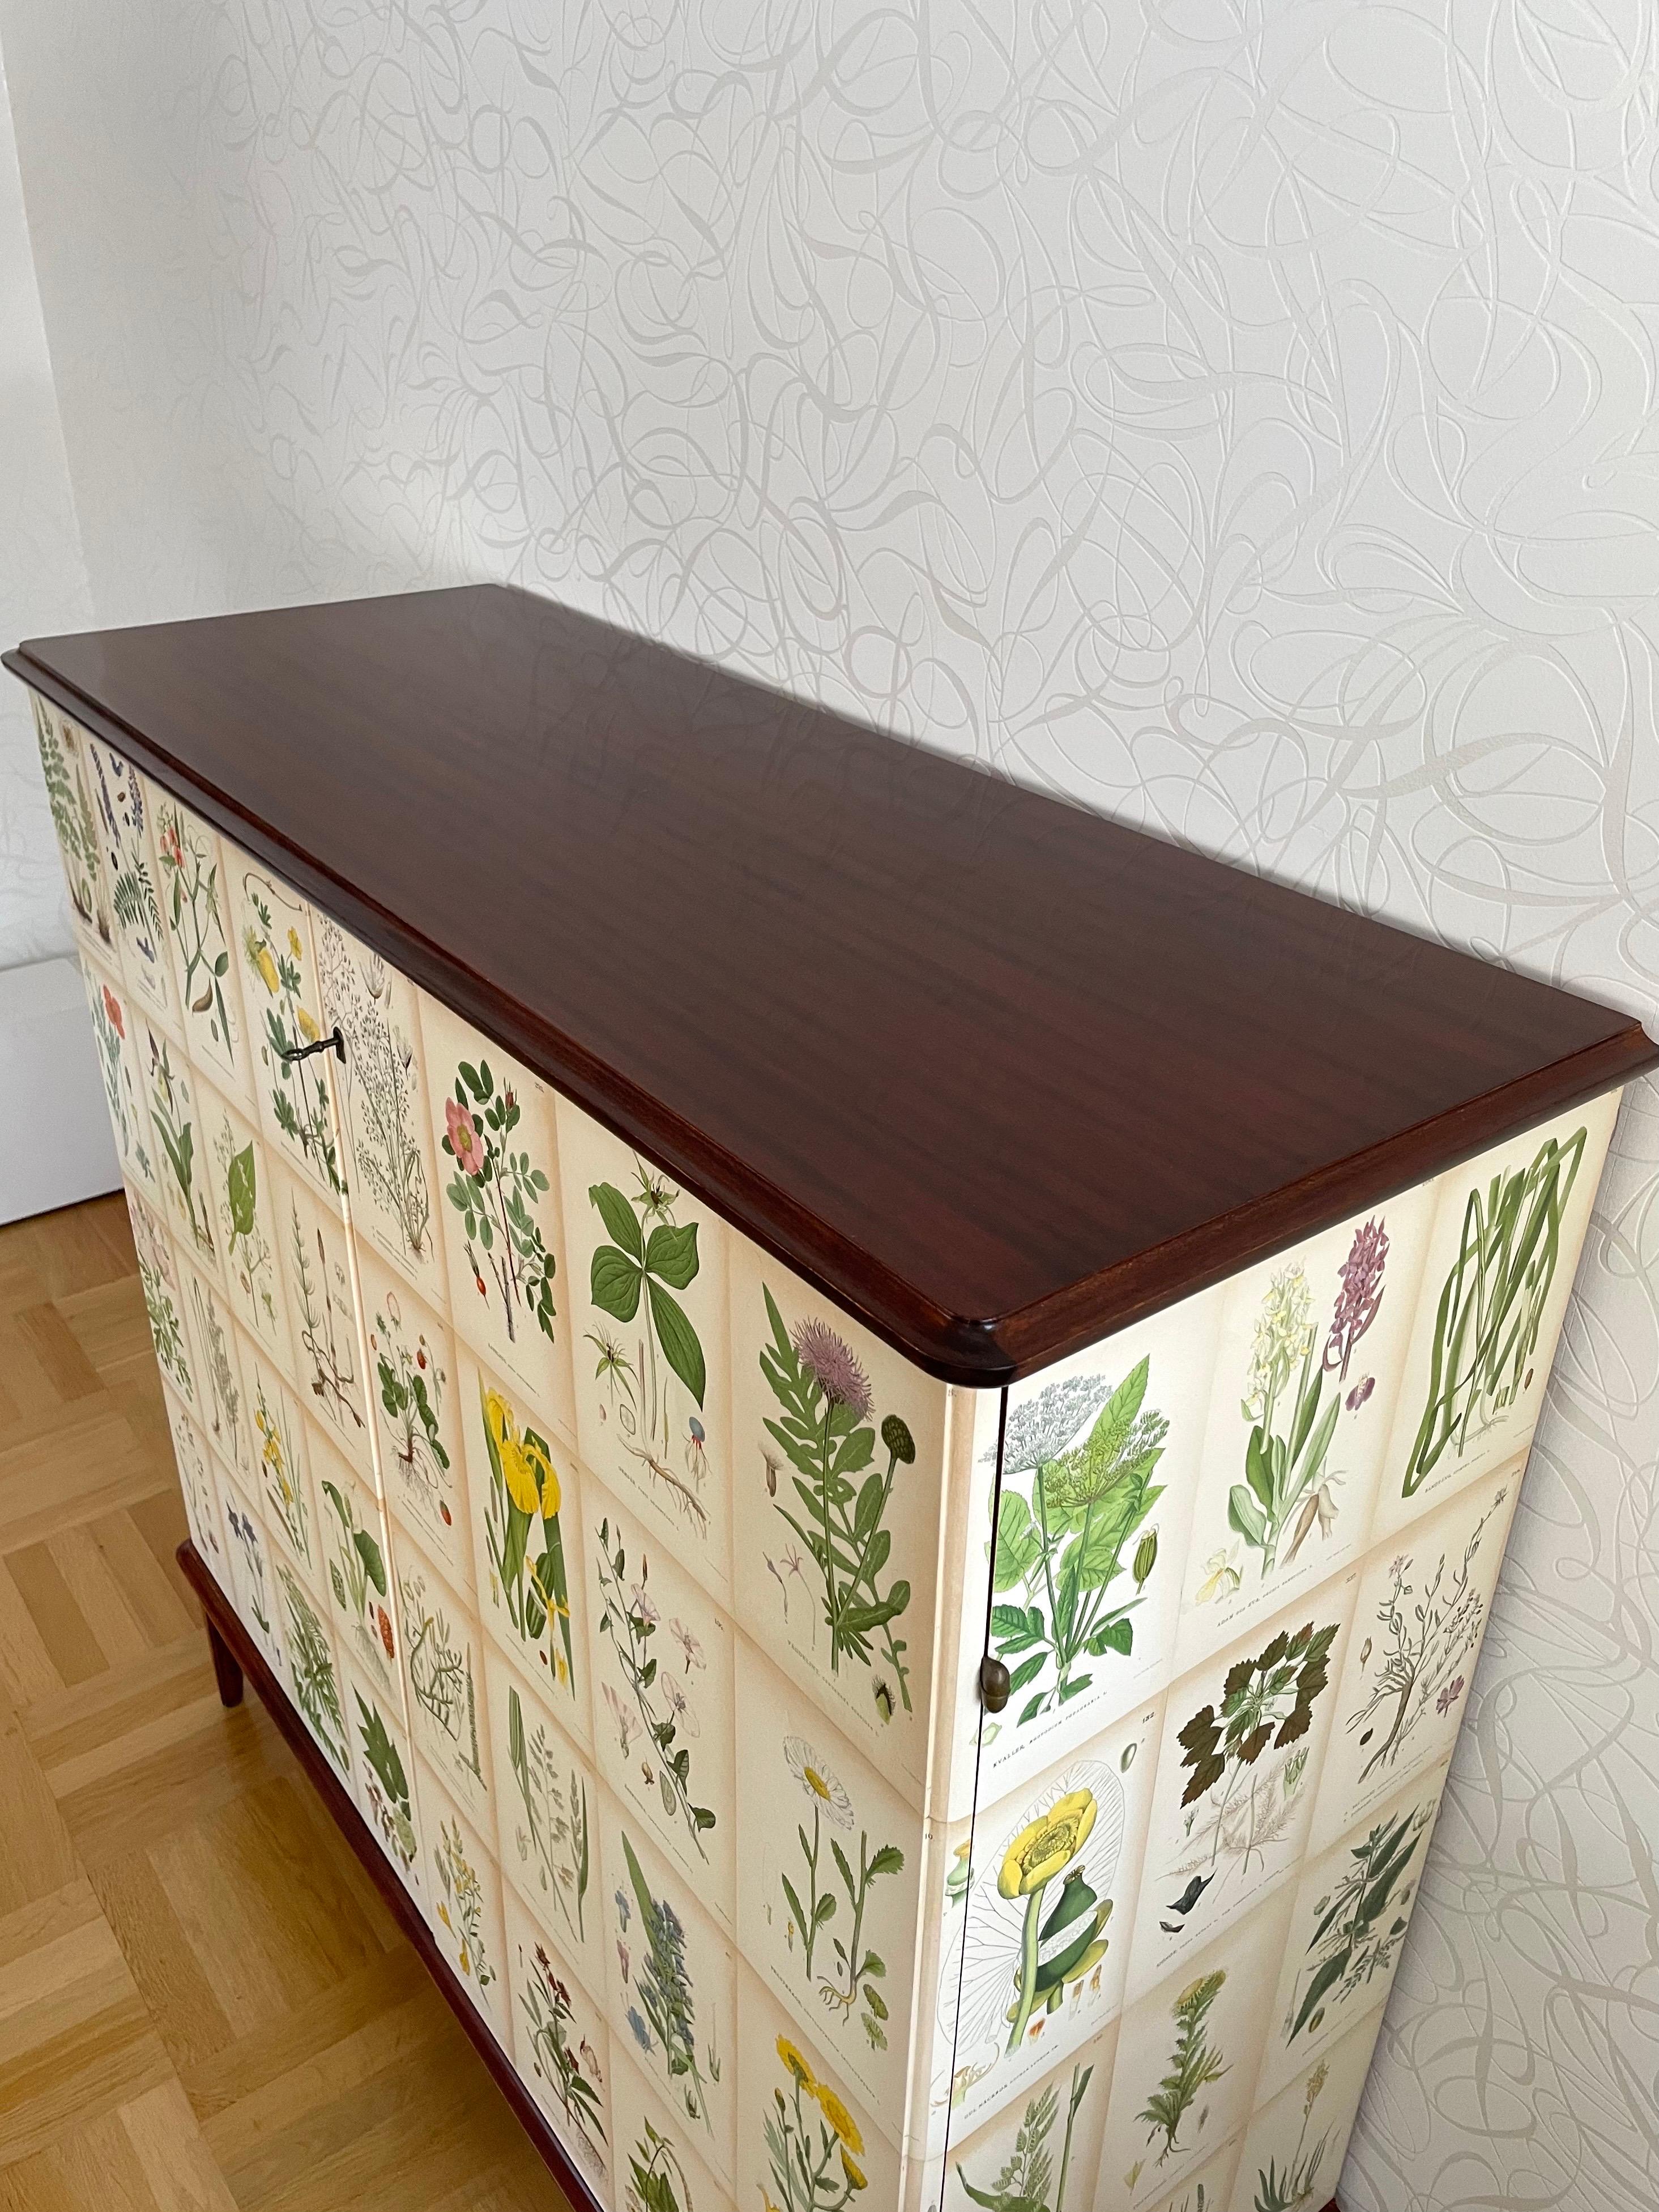 Swedish Modern 1950s Mahogny Cabinet with Nordens Flora (Nordic Flowers) Decor 
 In Good Condition For Sale In Örebro, SE